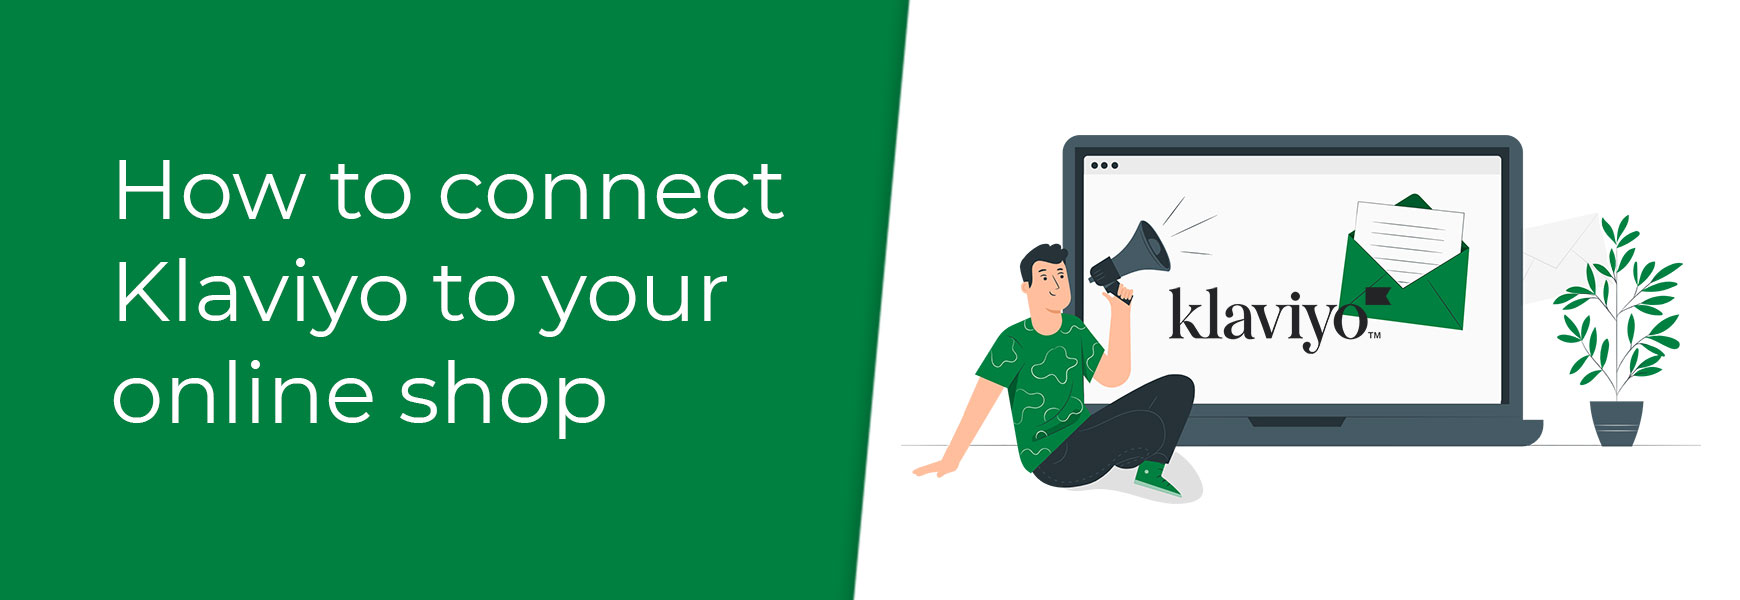 How to connect Klaviyo to your online shop